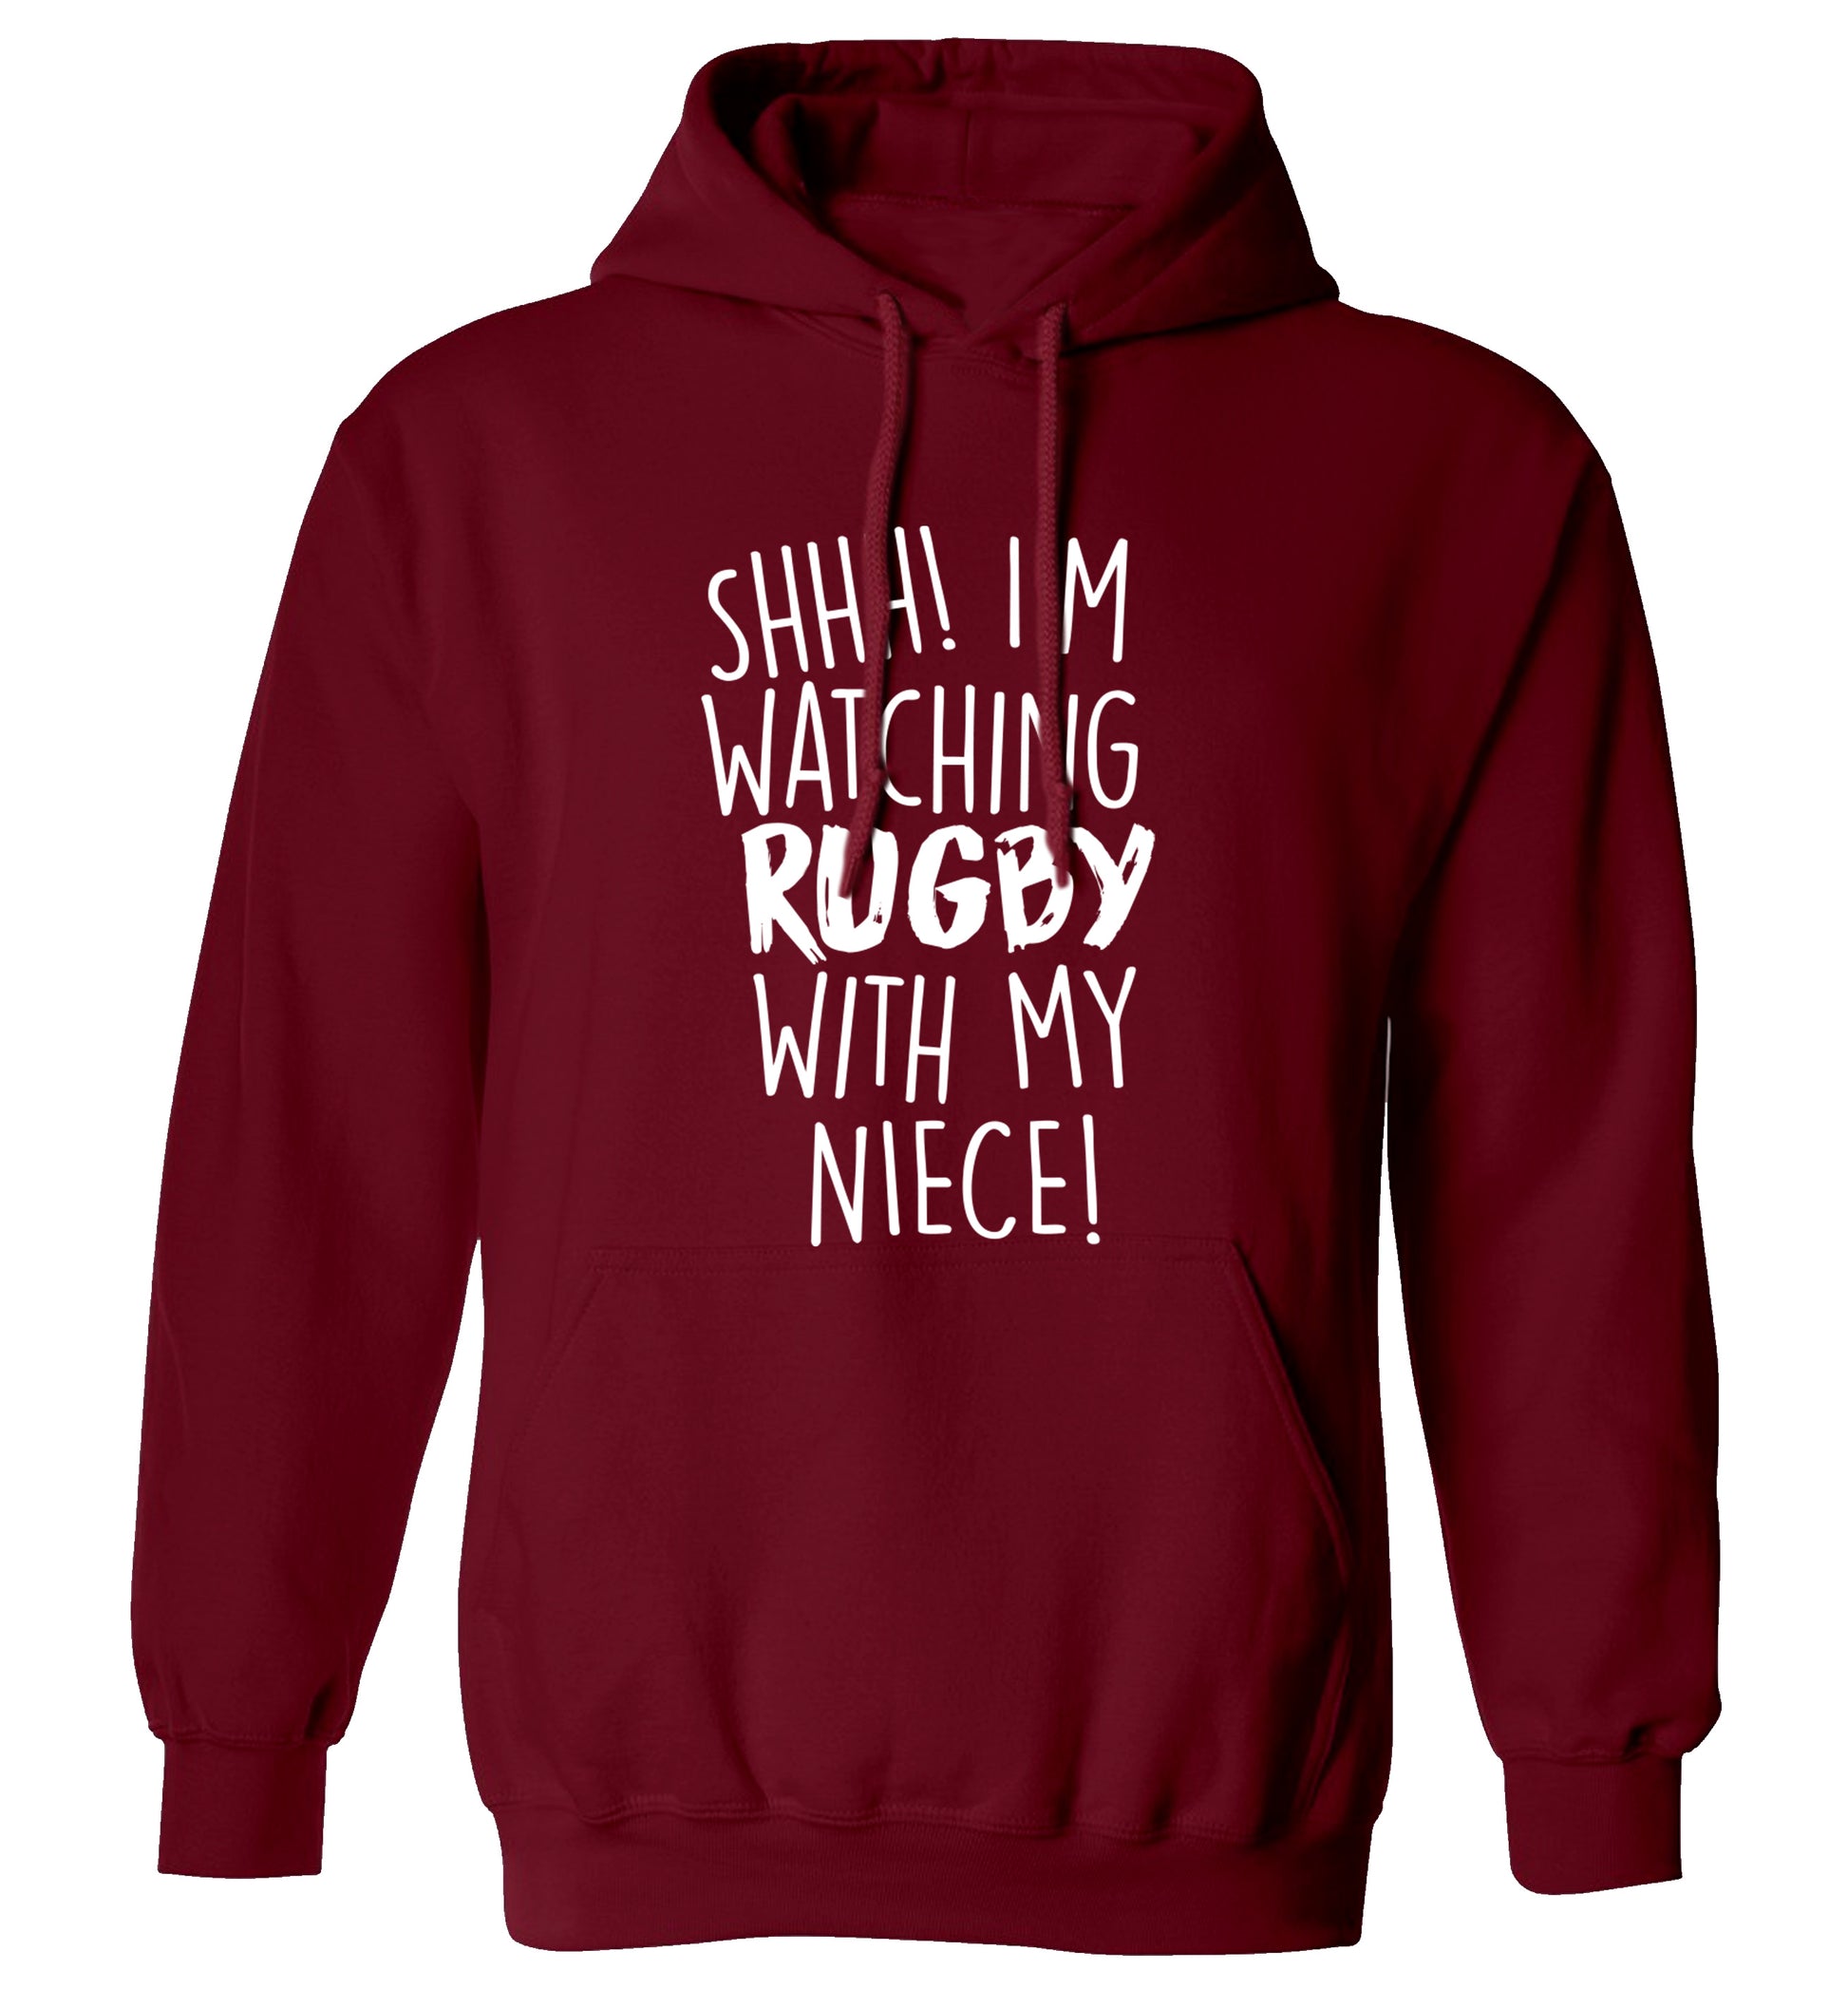 Shh.. I'm watching rugby with my niece adults unisex maroon hoodie 2XL